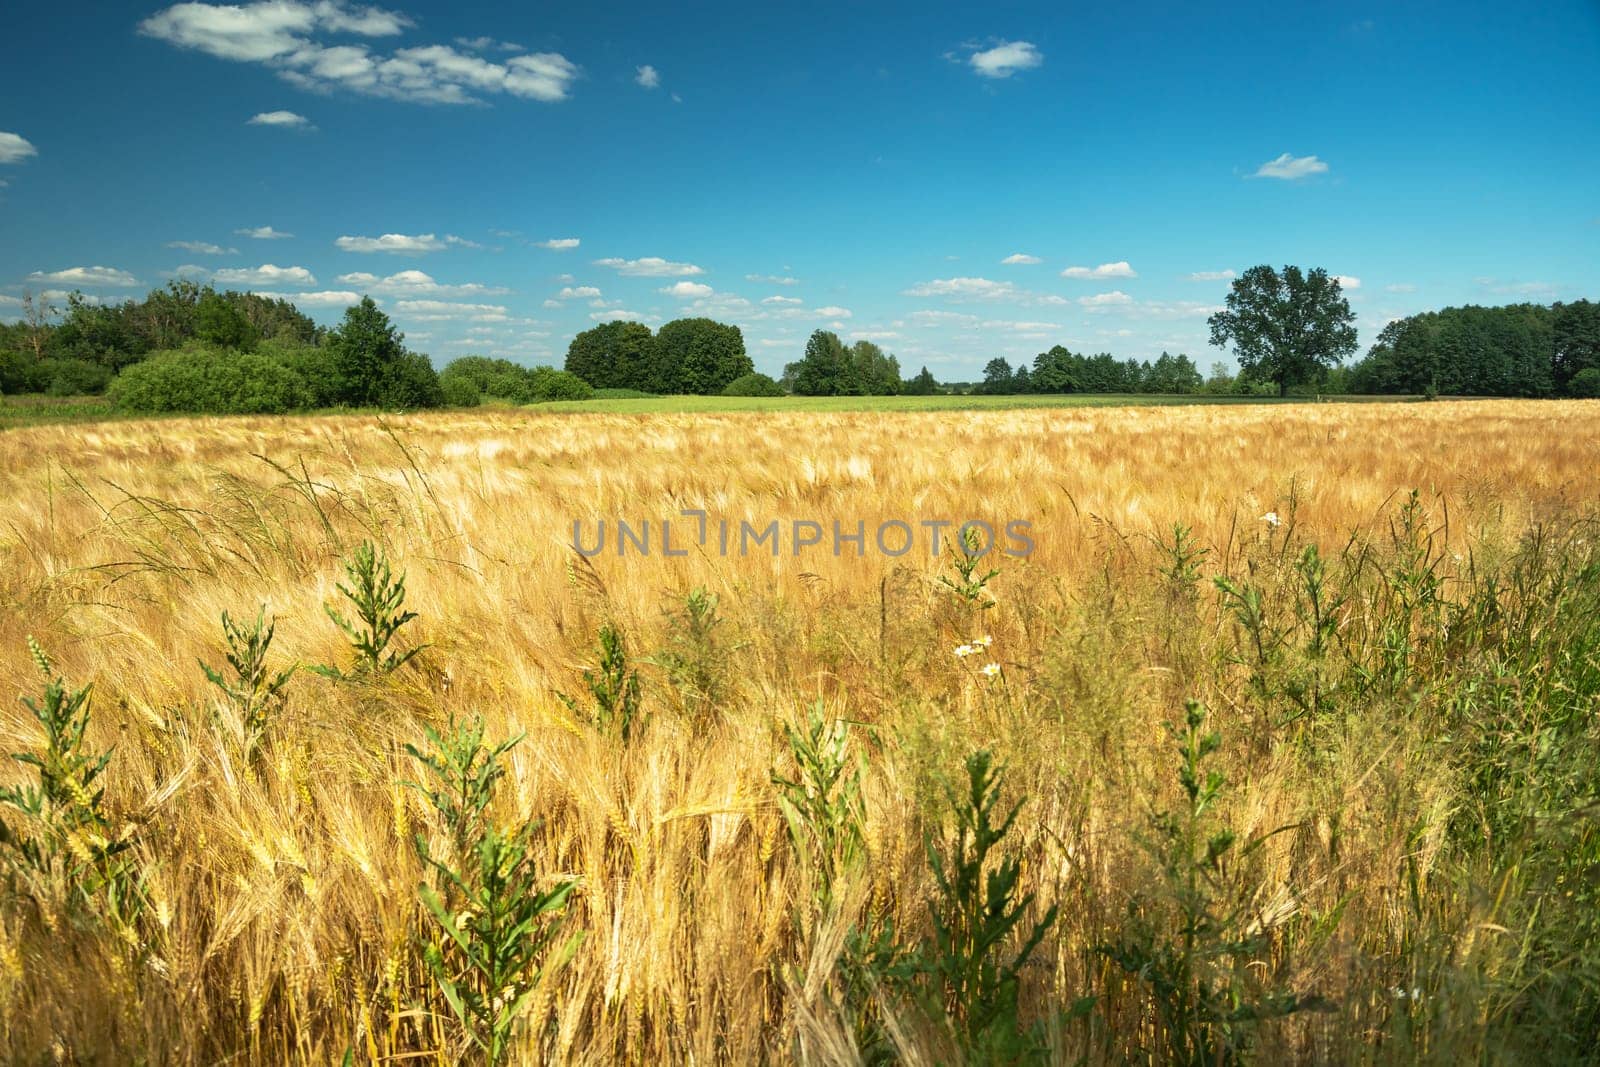 Weeds in golden barley grain, agricultural summer view, Nowiny, Poland